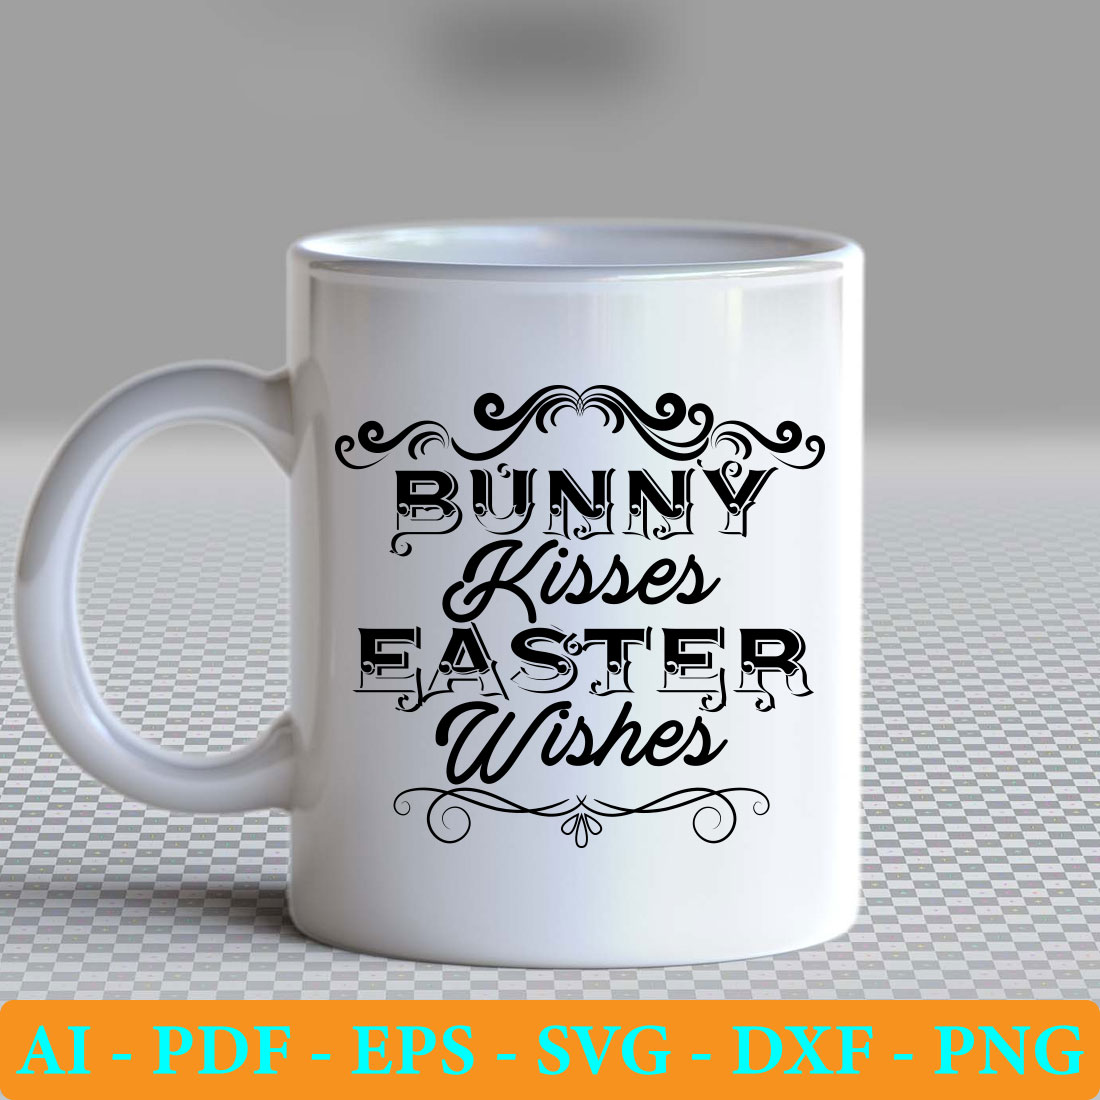 White coffee mug with the words bunny kisses faster wishes.